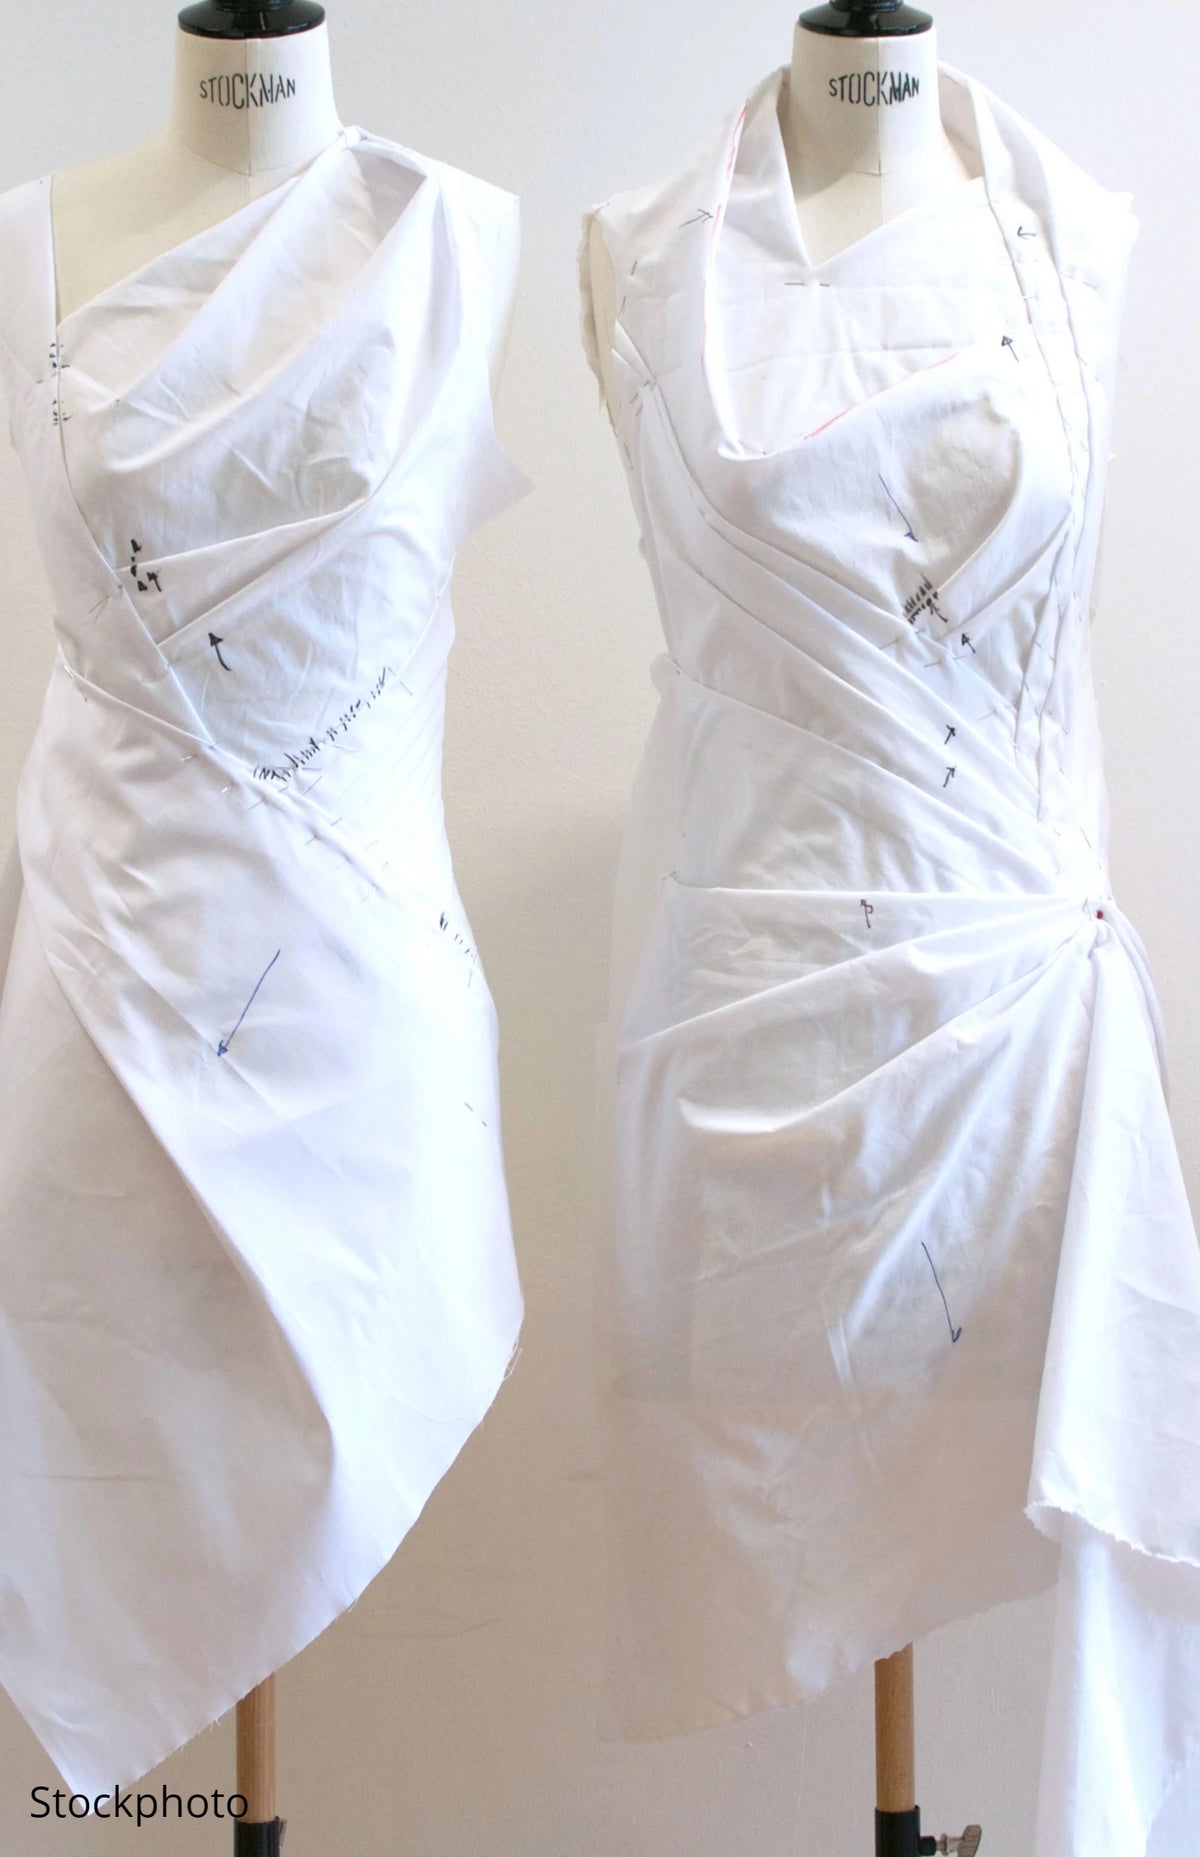 Moulage and Draping Workshop 2 - 15 sessions